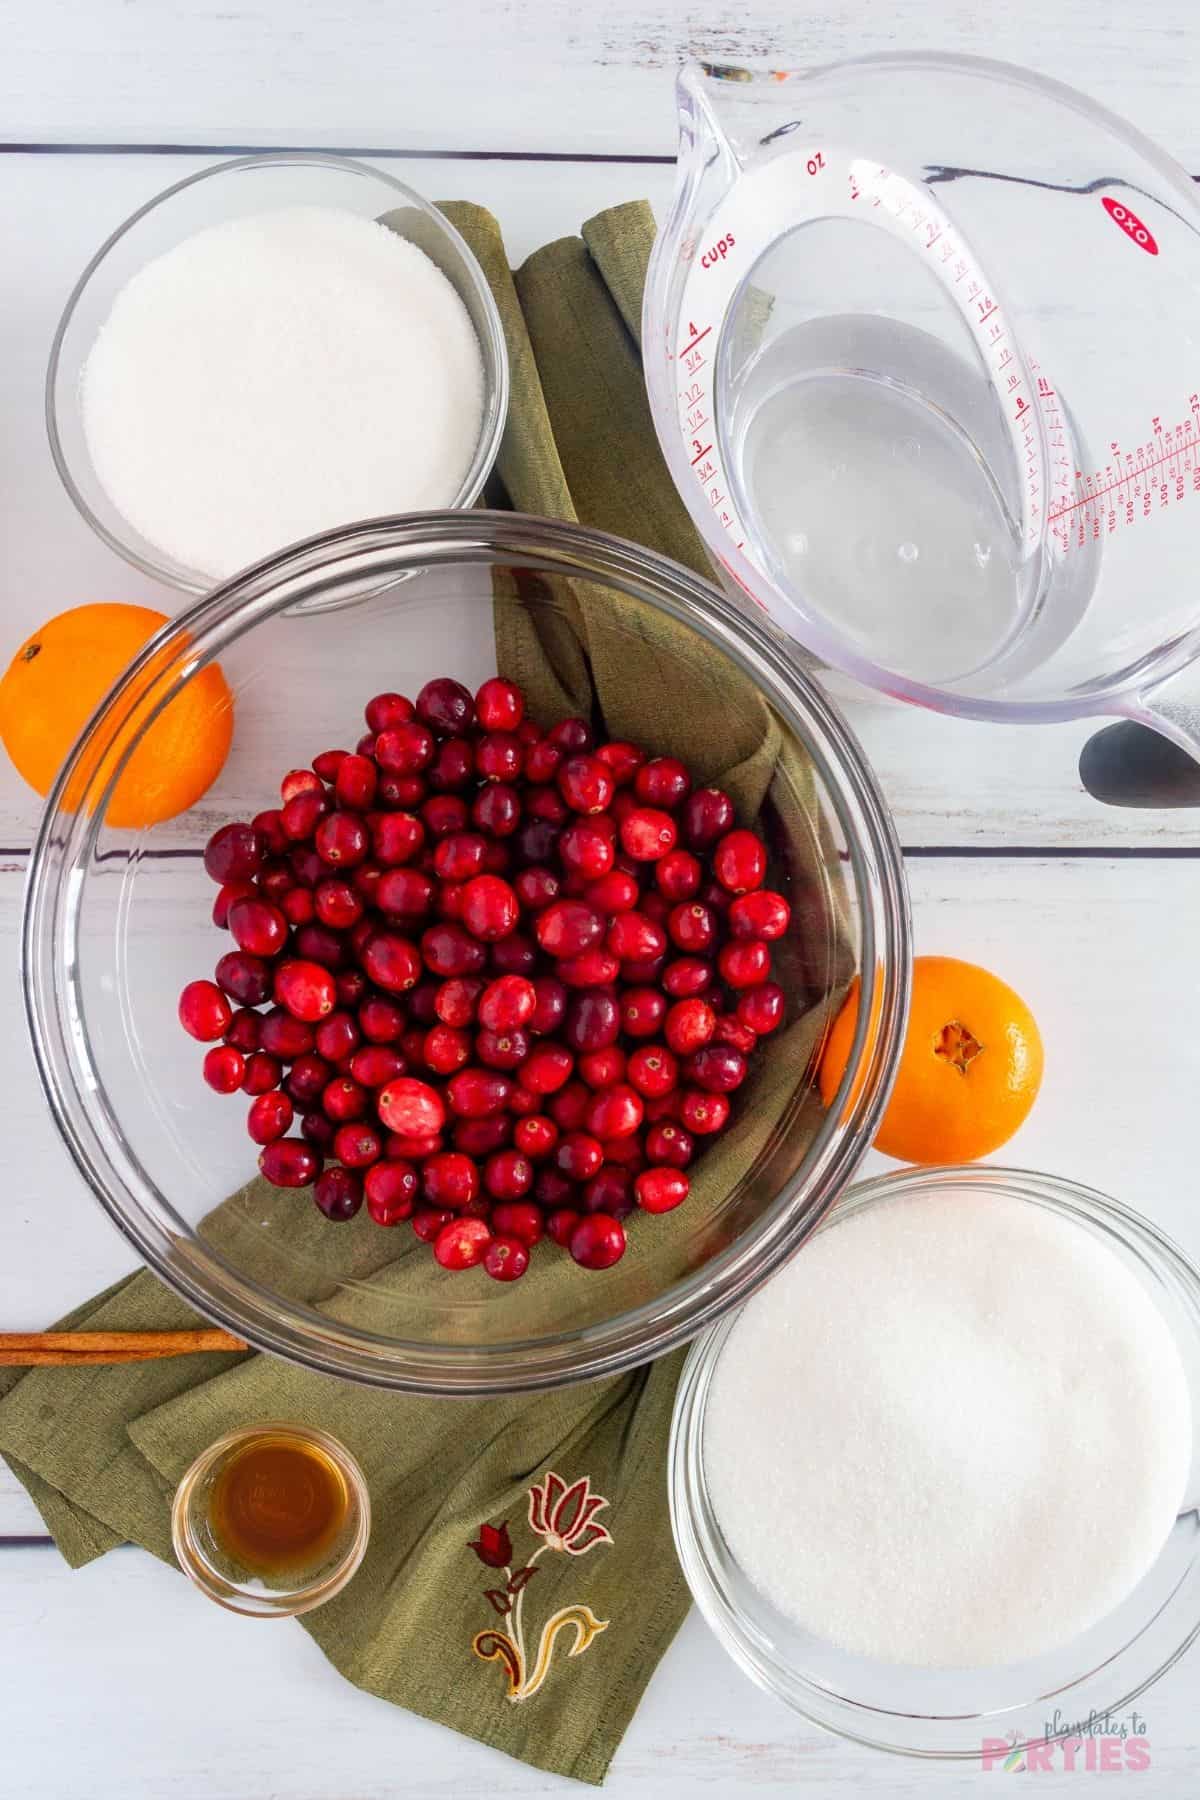 Ingredients for sugared cranberries with orange and vanilla.